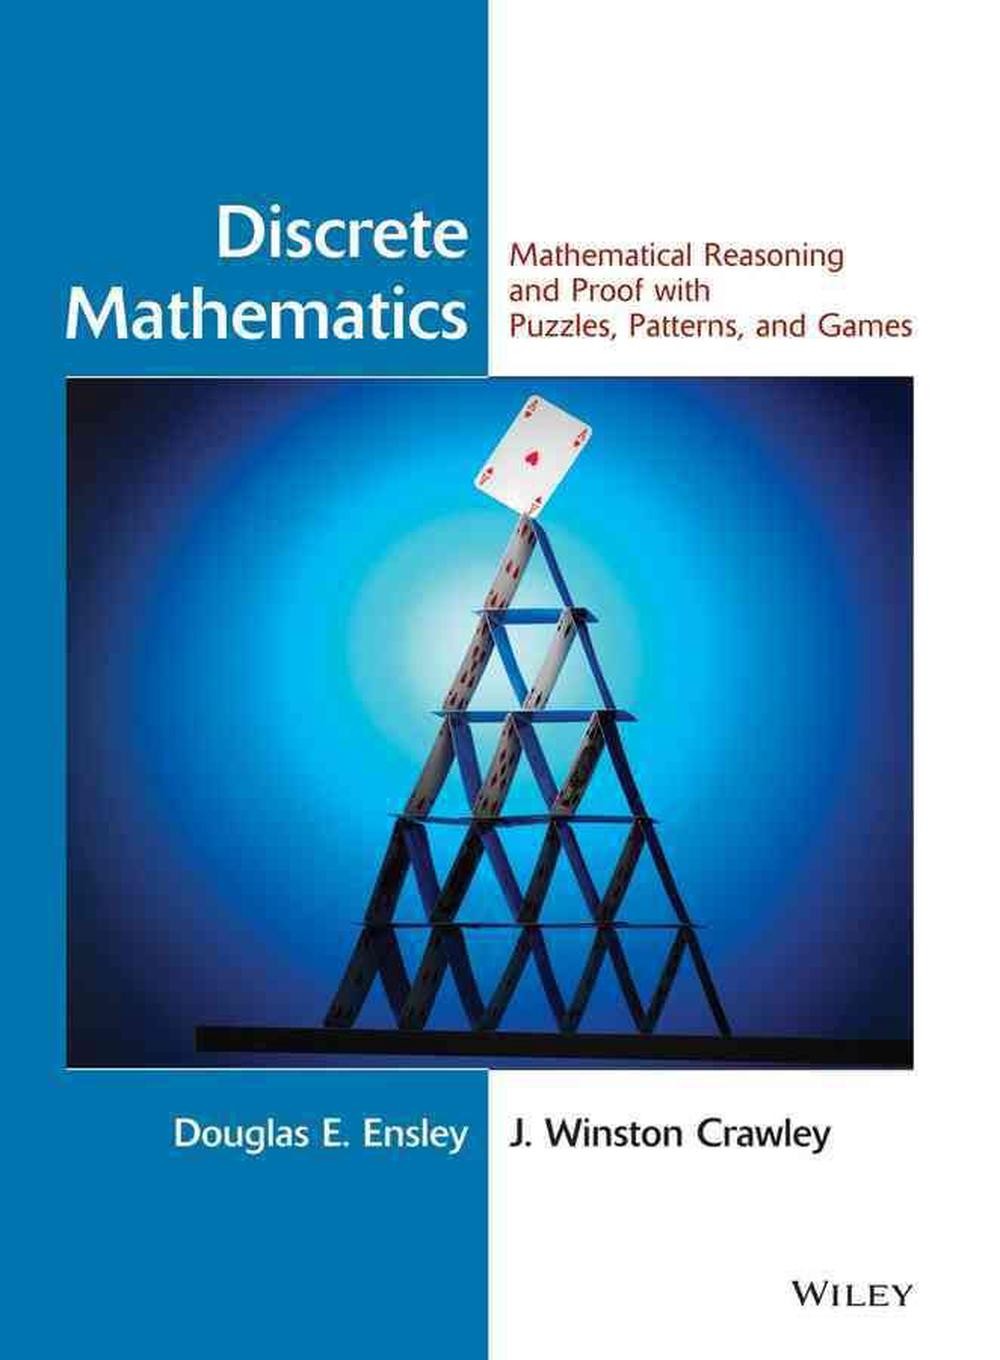 Discrete Mathematics: Mathematical Reasoning and Proof with Puzzles, Patterns, and Games